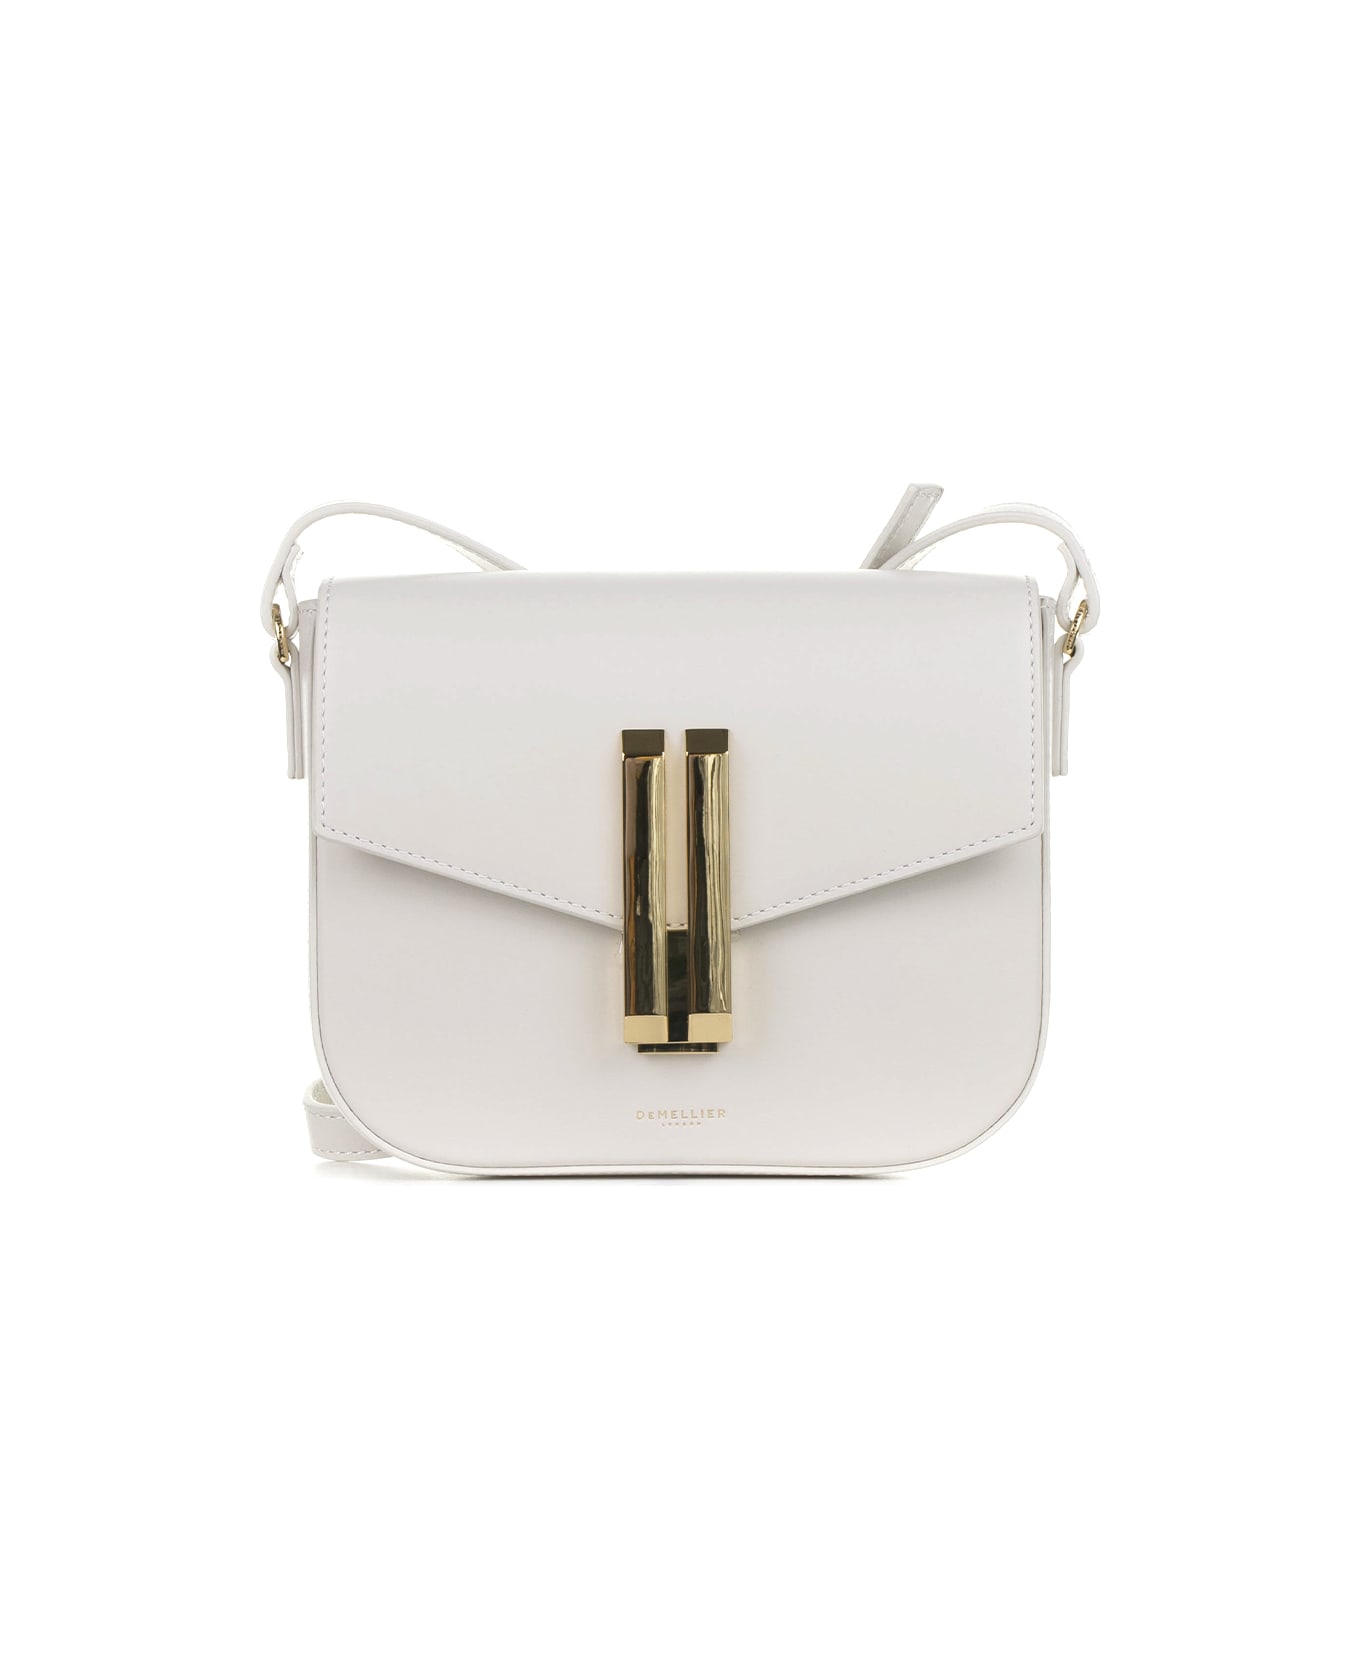 Demellier Vancouver Small Leather Shoulder Bag - OFF WHITE